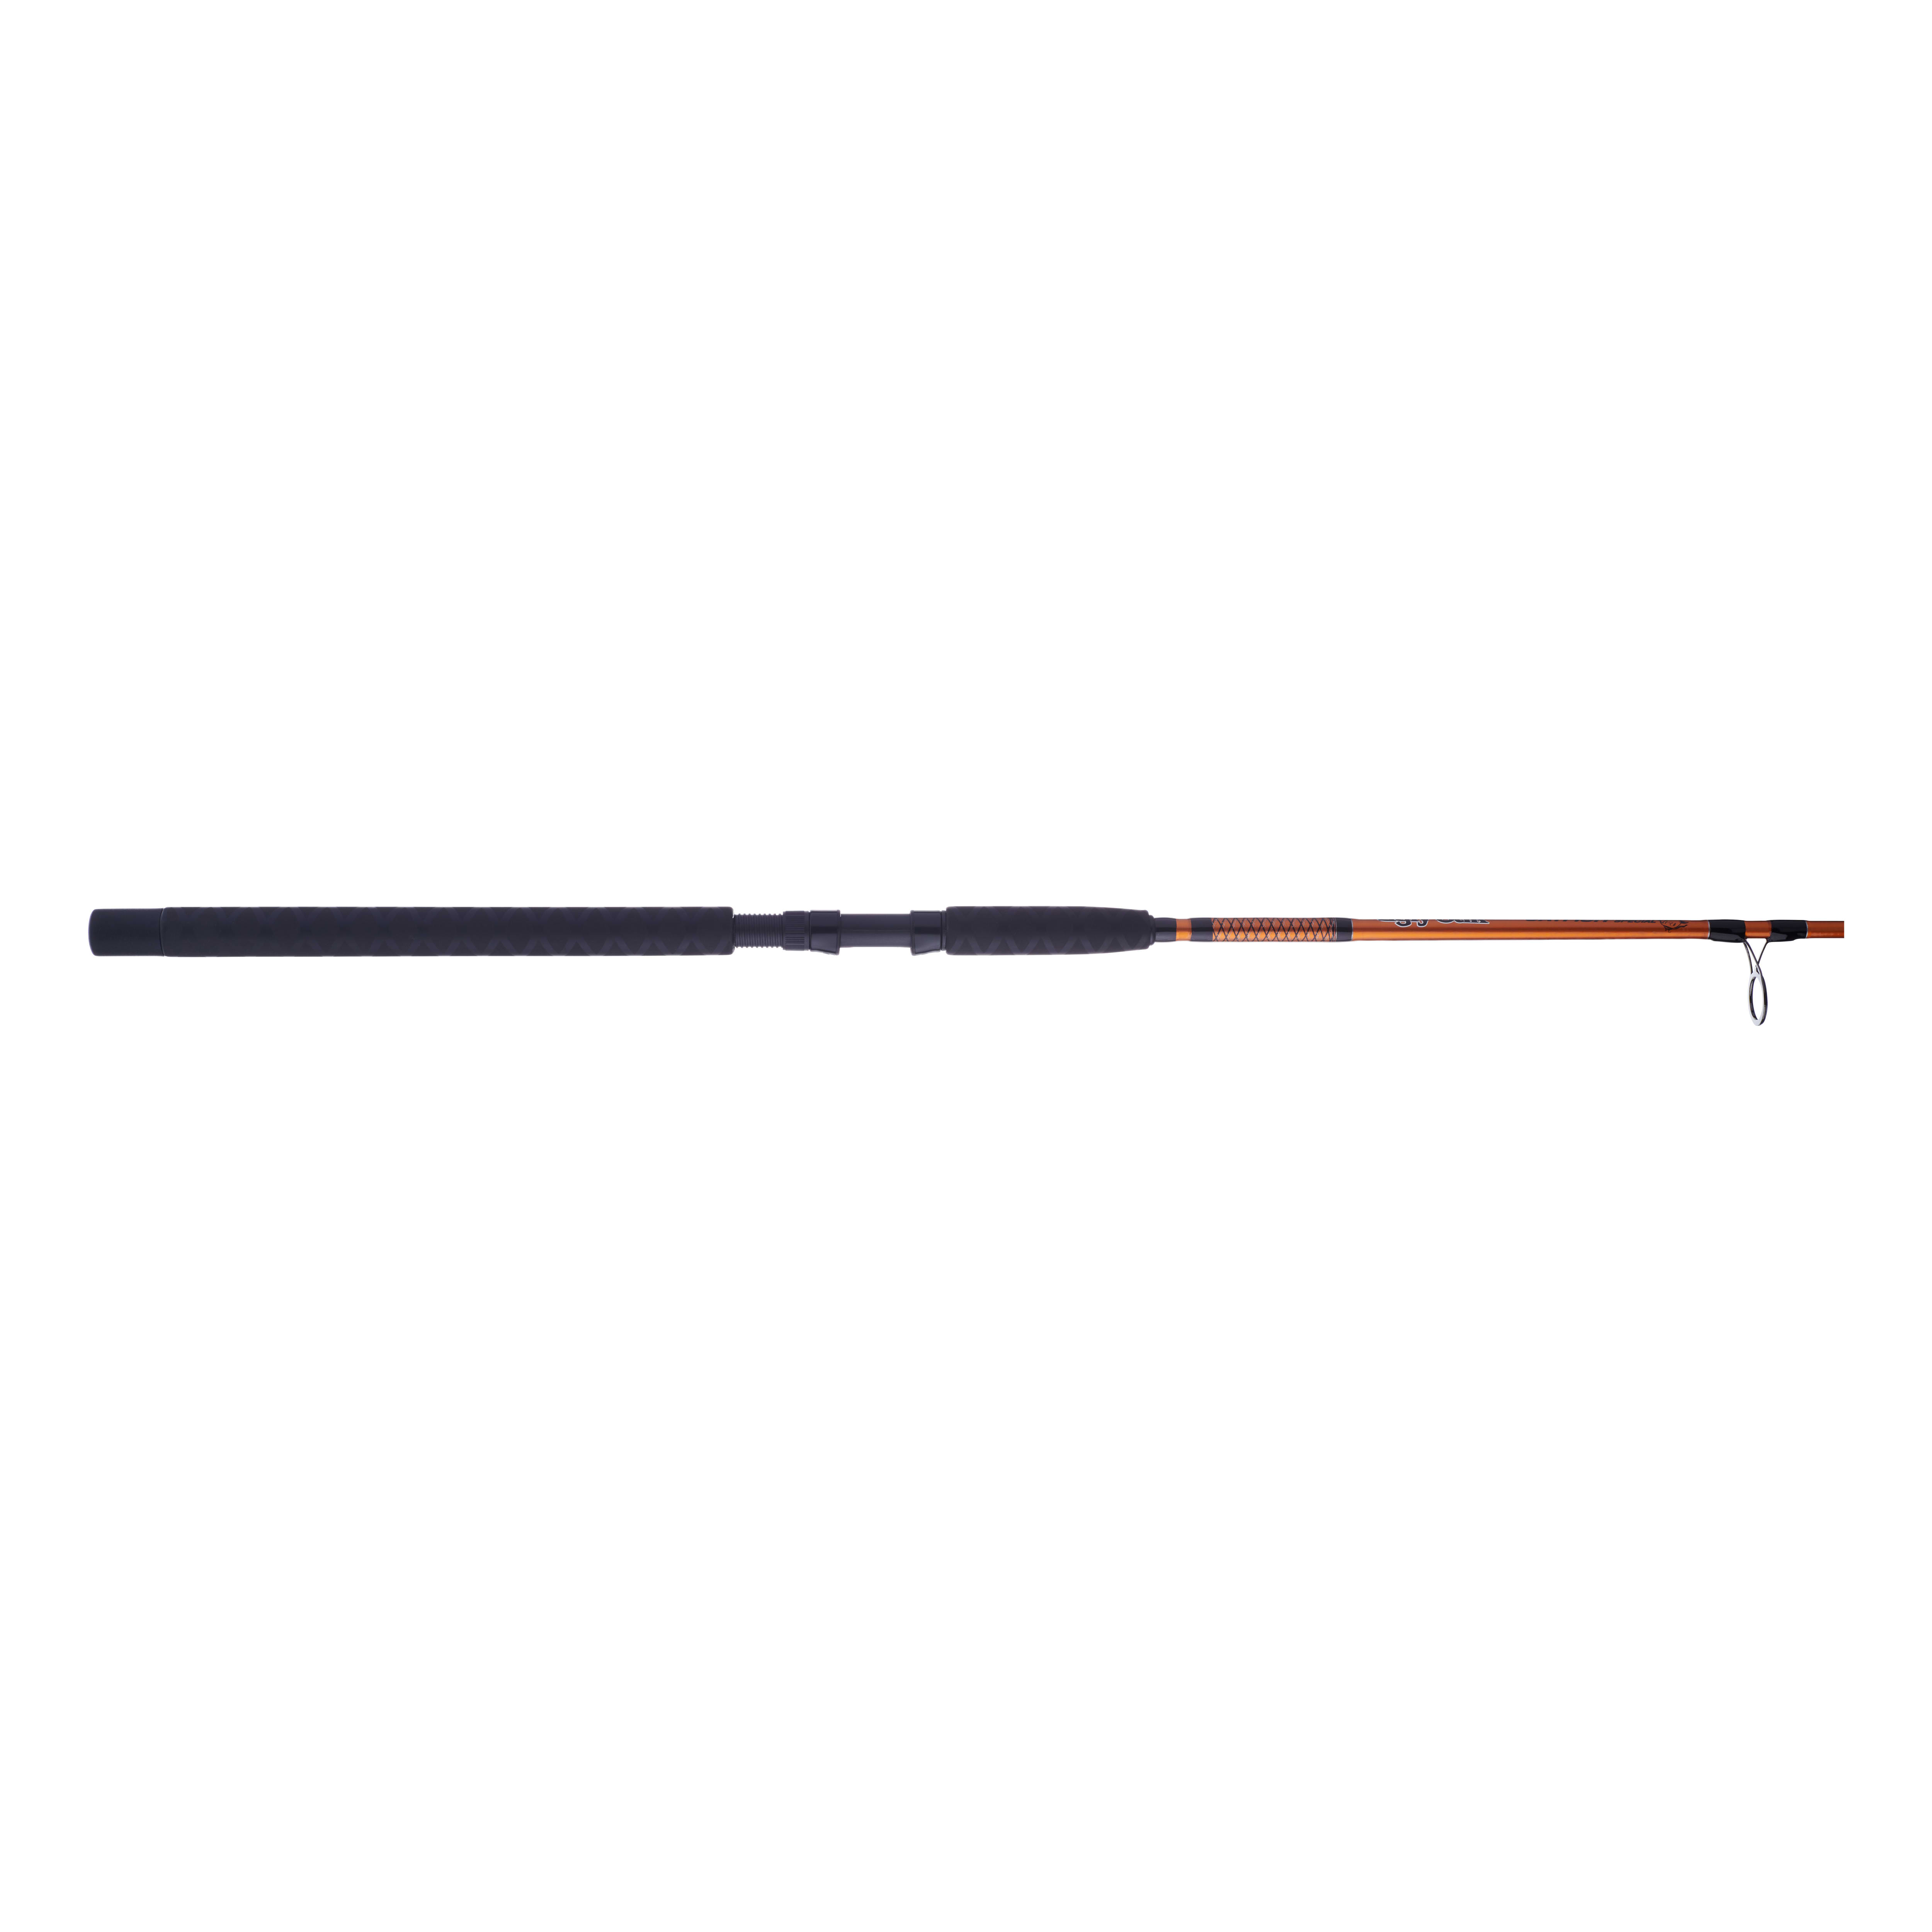 Ugly Stik Catfish Special Casting Rod - Pure Fishing